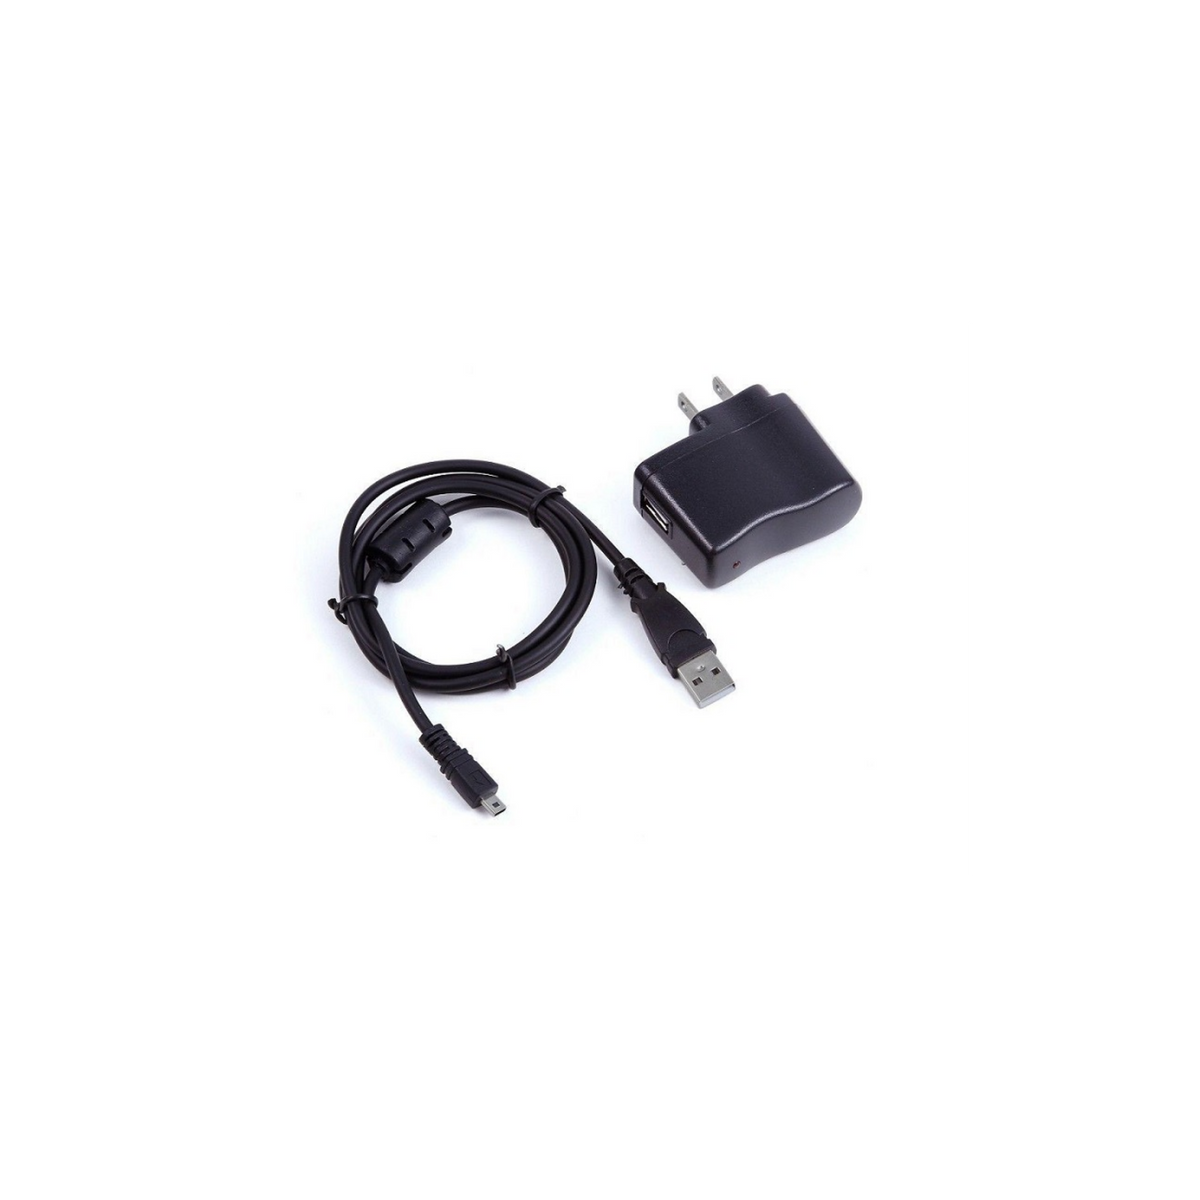 USB POWER ADAPTER (5W) FOR SM-L PRINTER